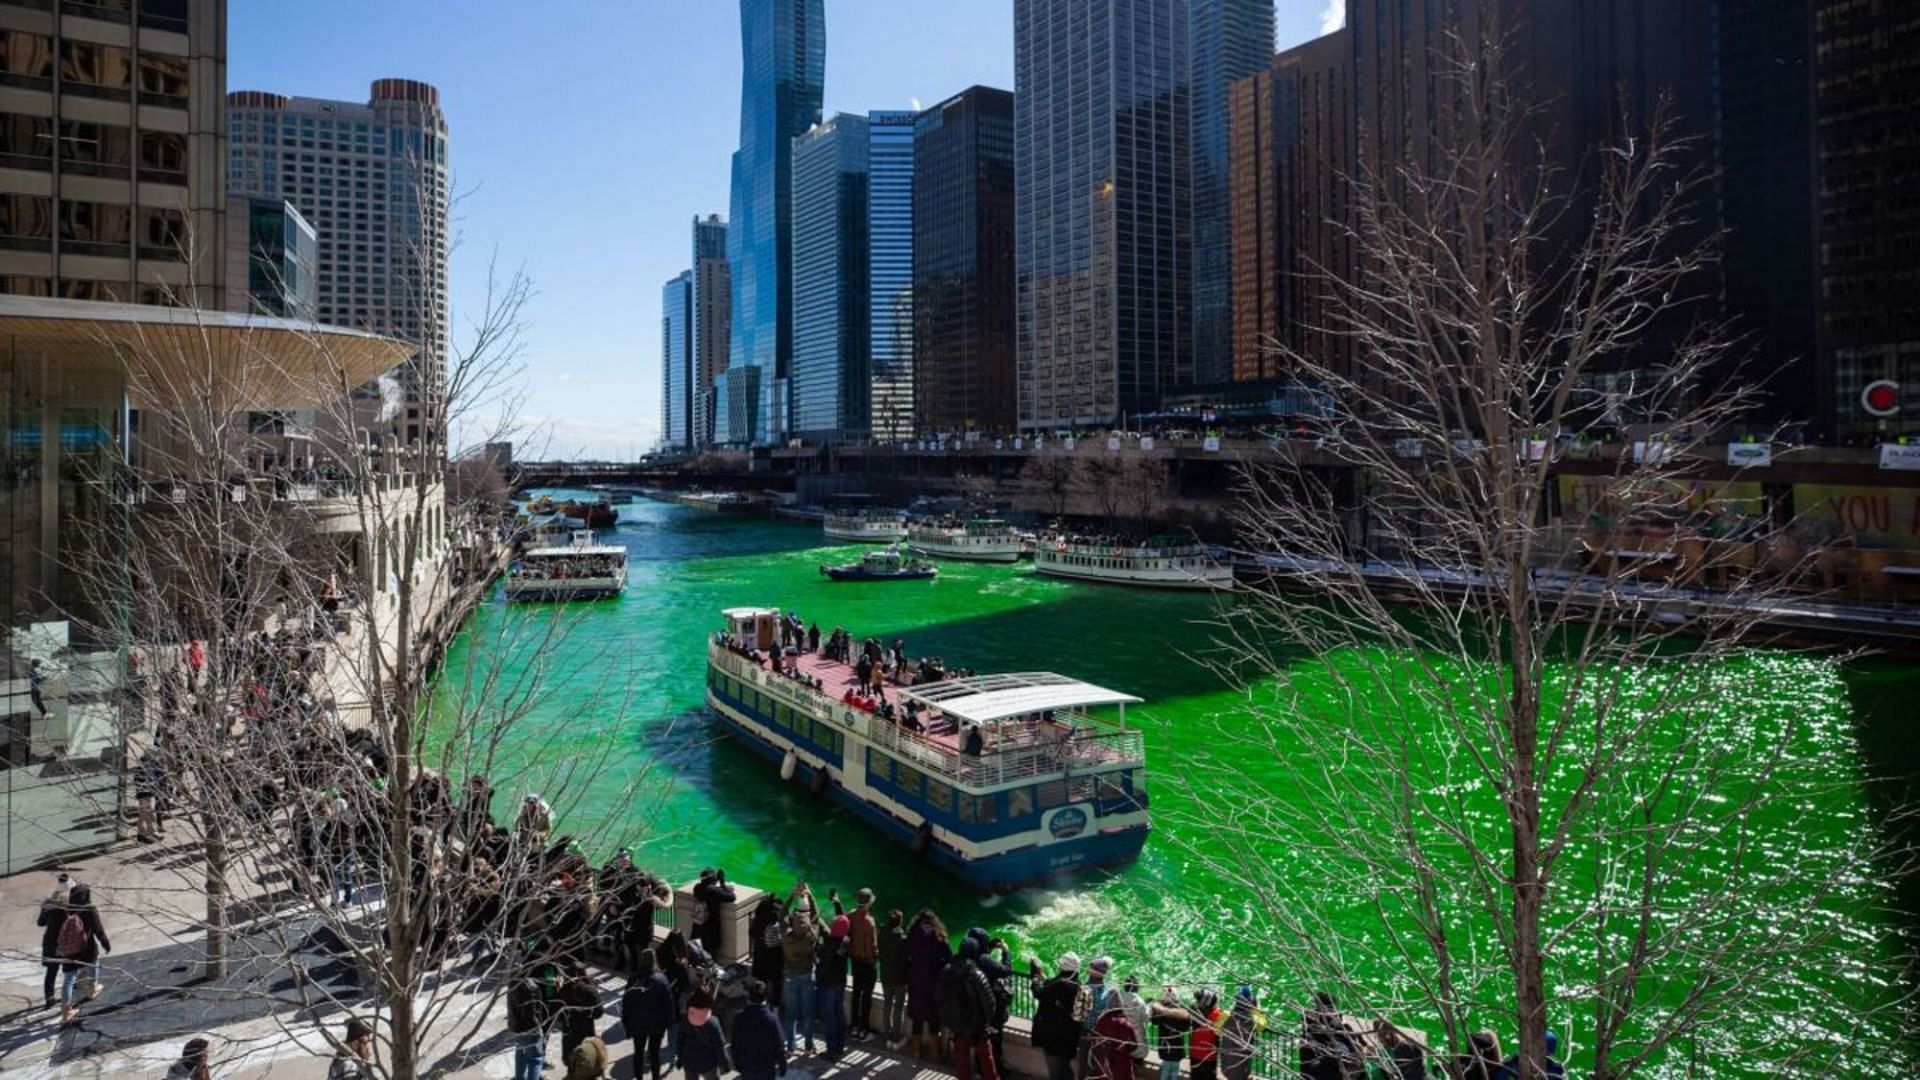 When and where to watch the dyeing of the Chicago River revealed (Image via Shutterstock)